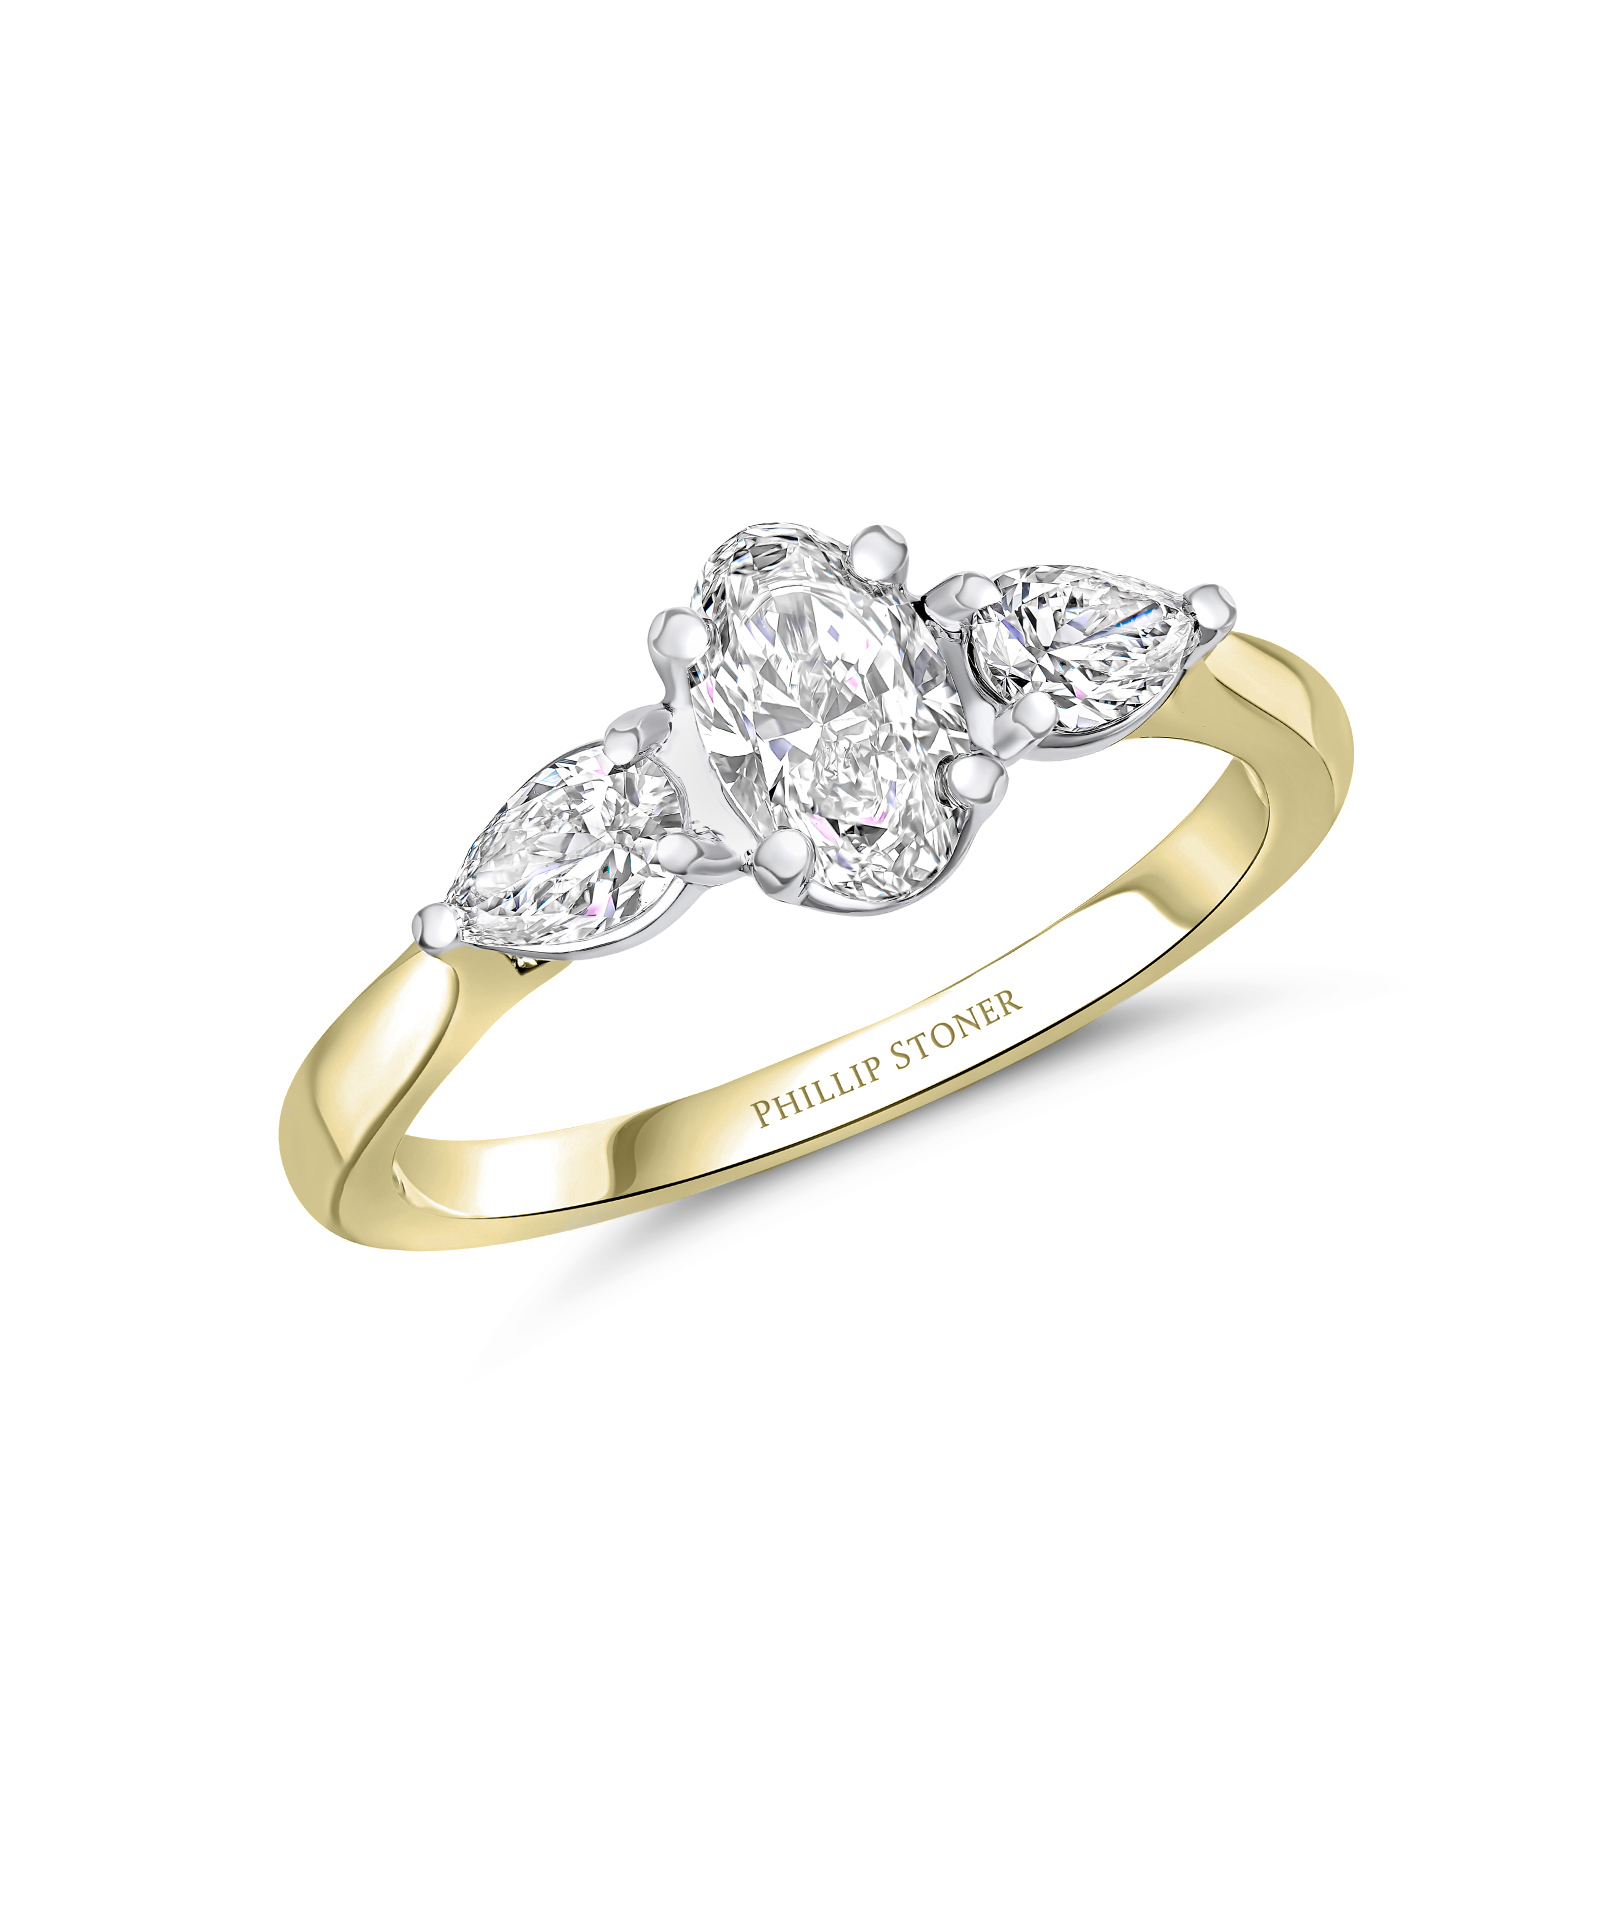 0.70ct Oval & Pear Cut Yellow Gold Three Stone Ring - Phillip Stoner The Jeweller